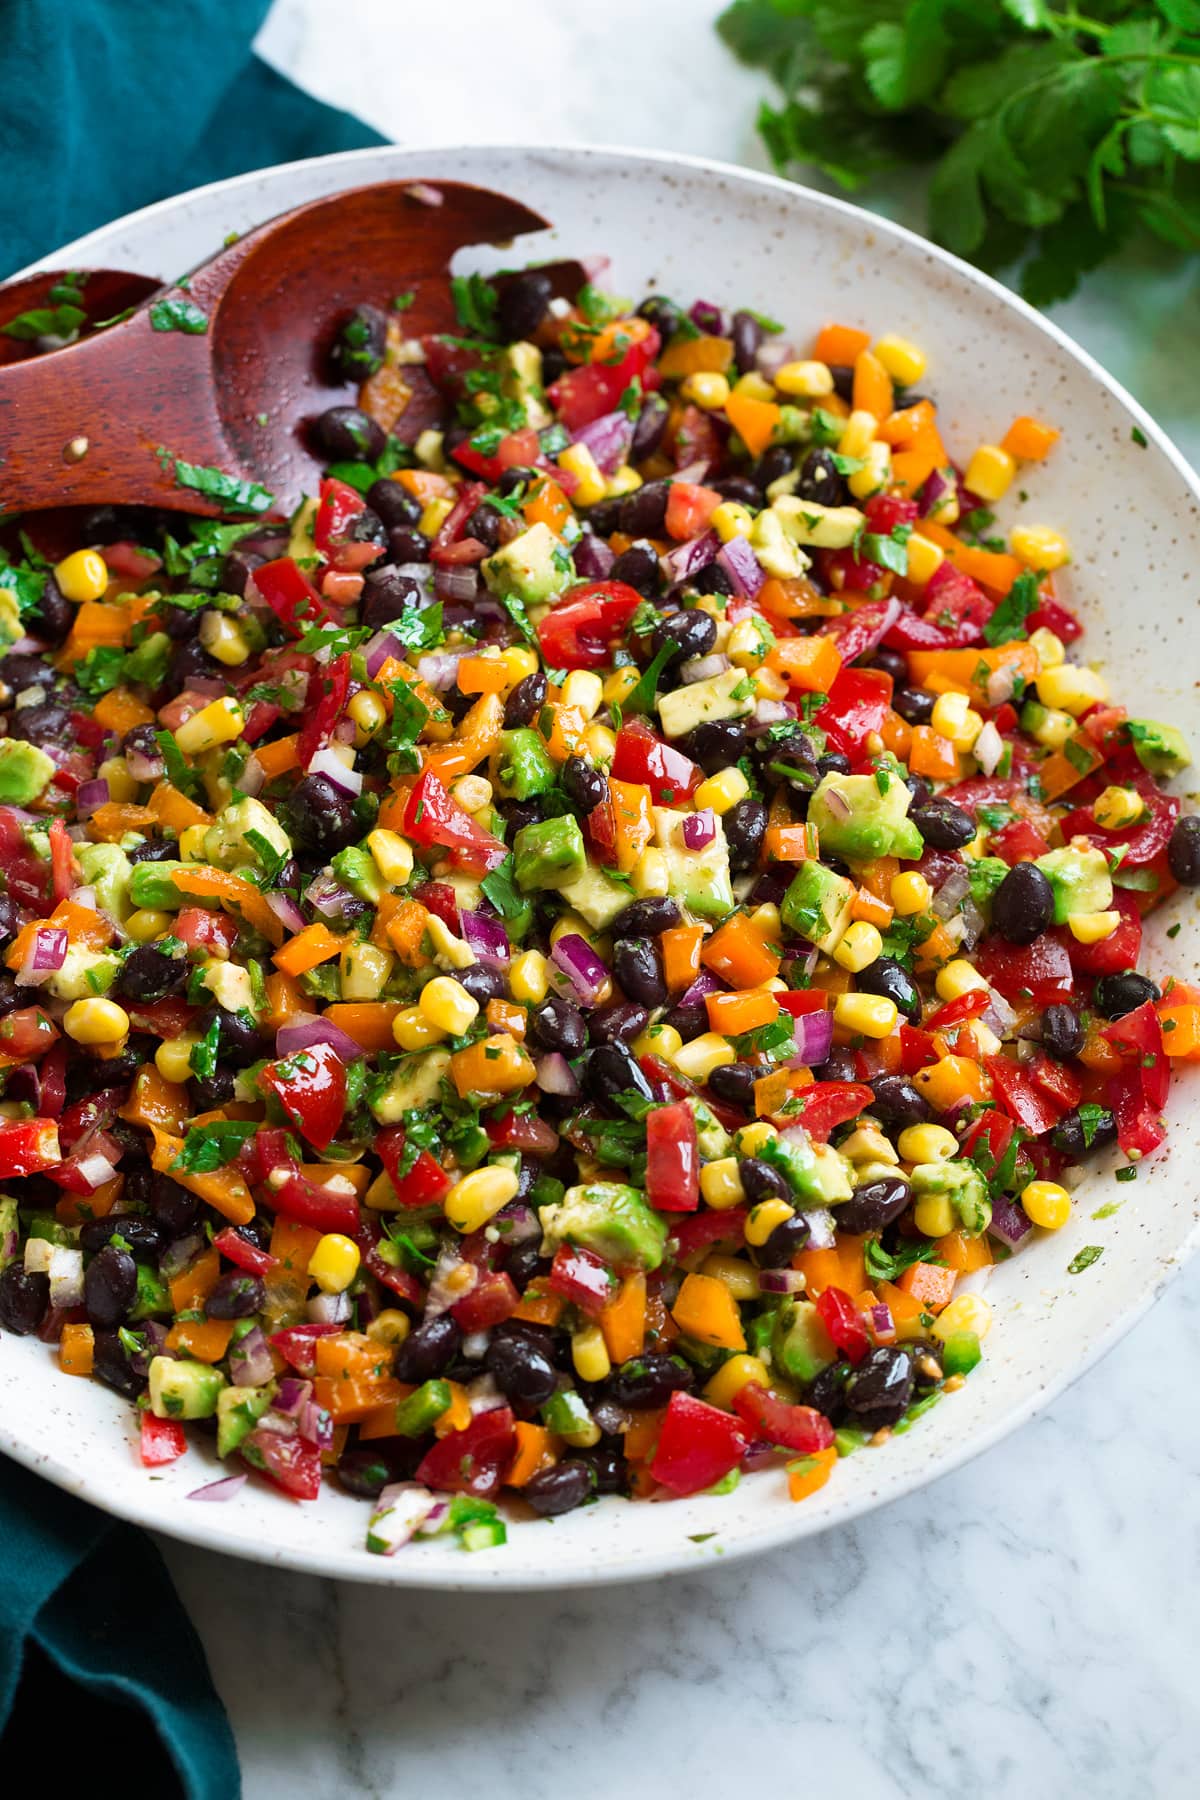 Black bean and corn salad in a white salad bowl with wooden serving spoons.